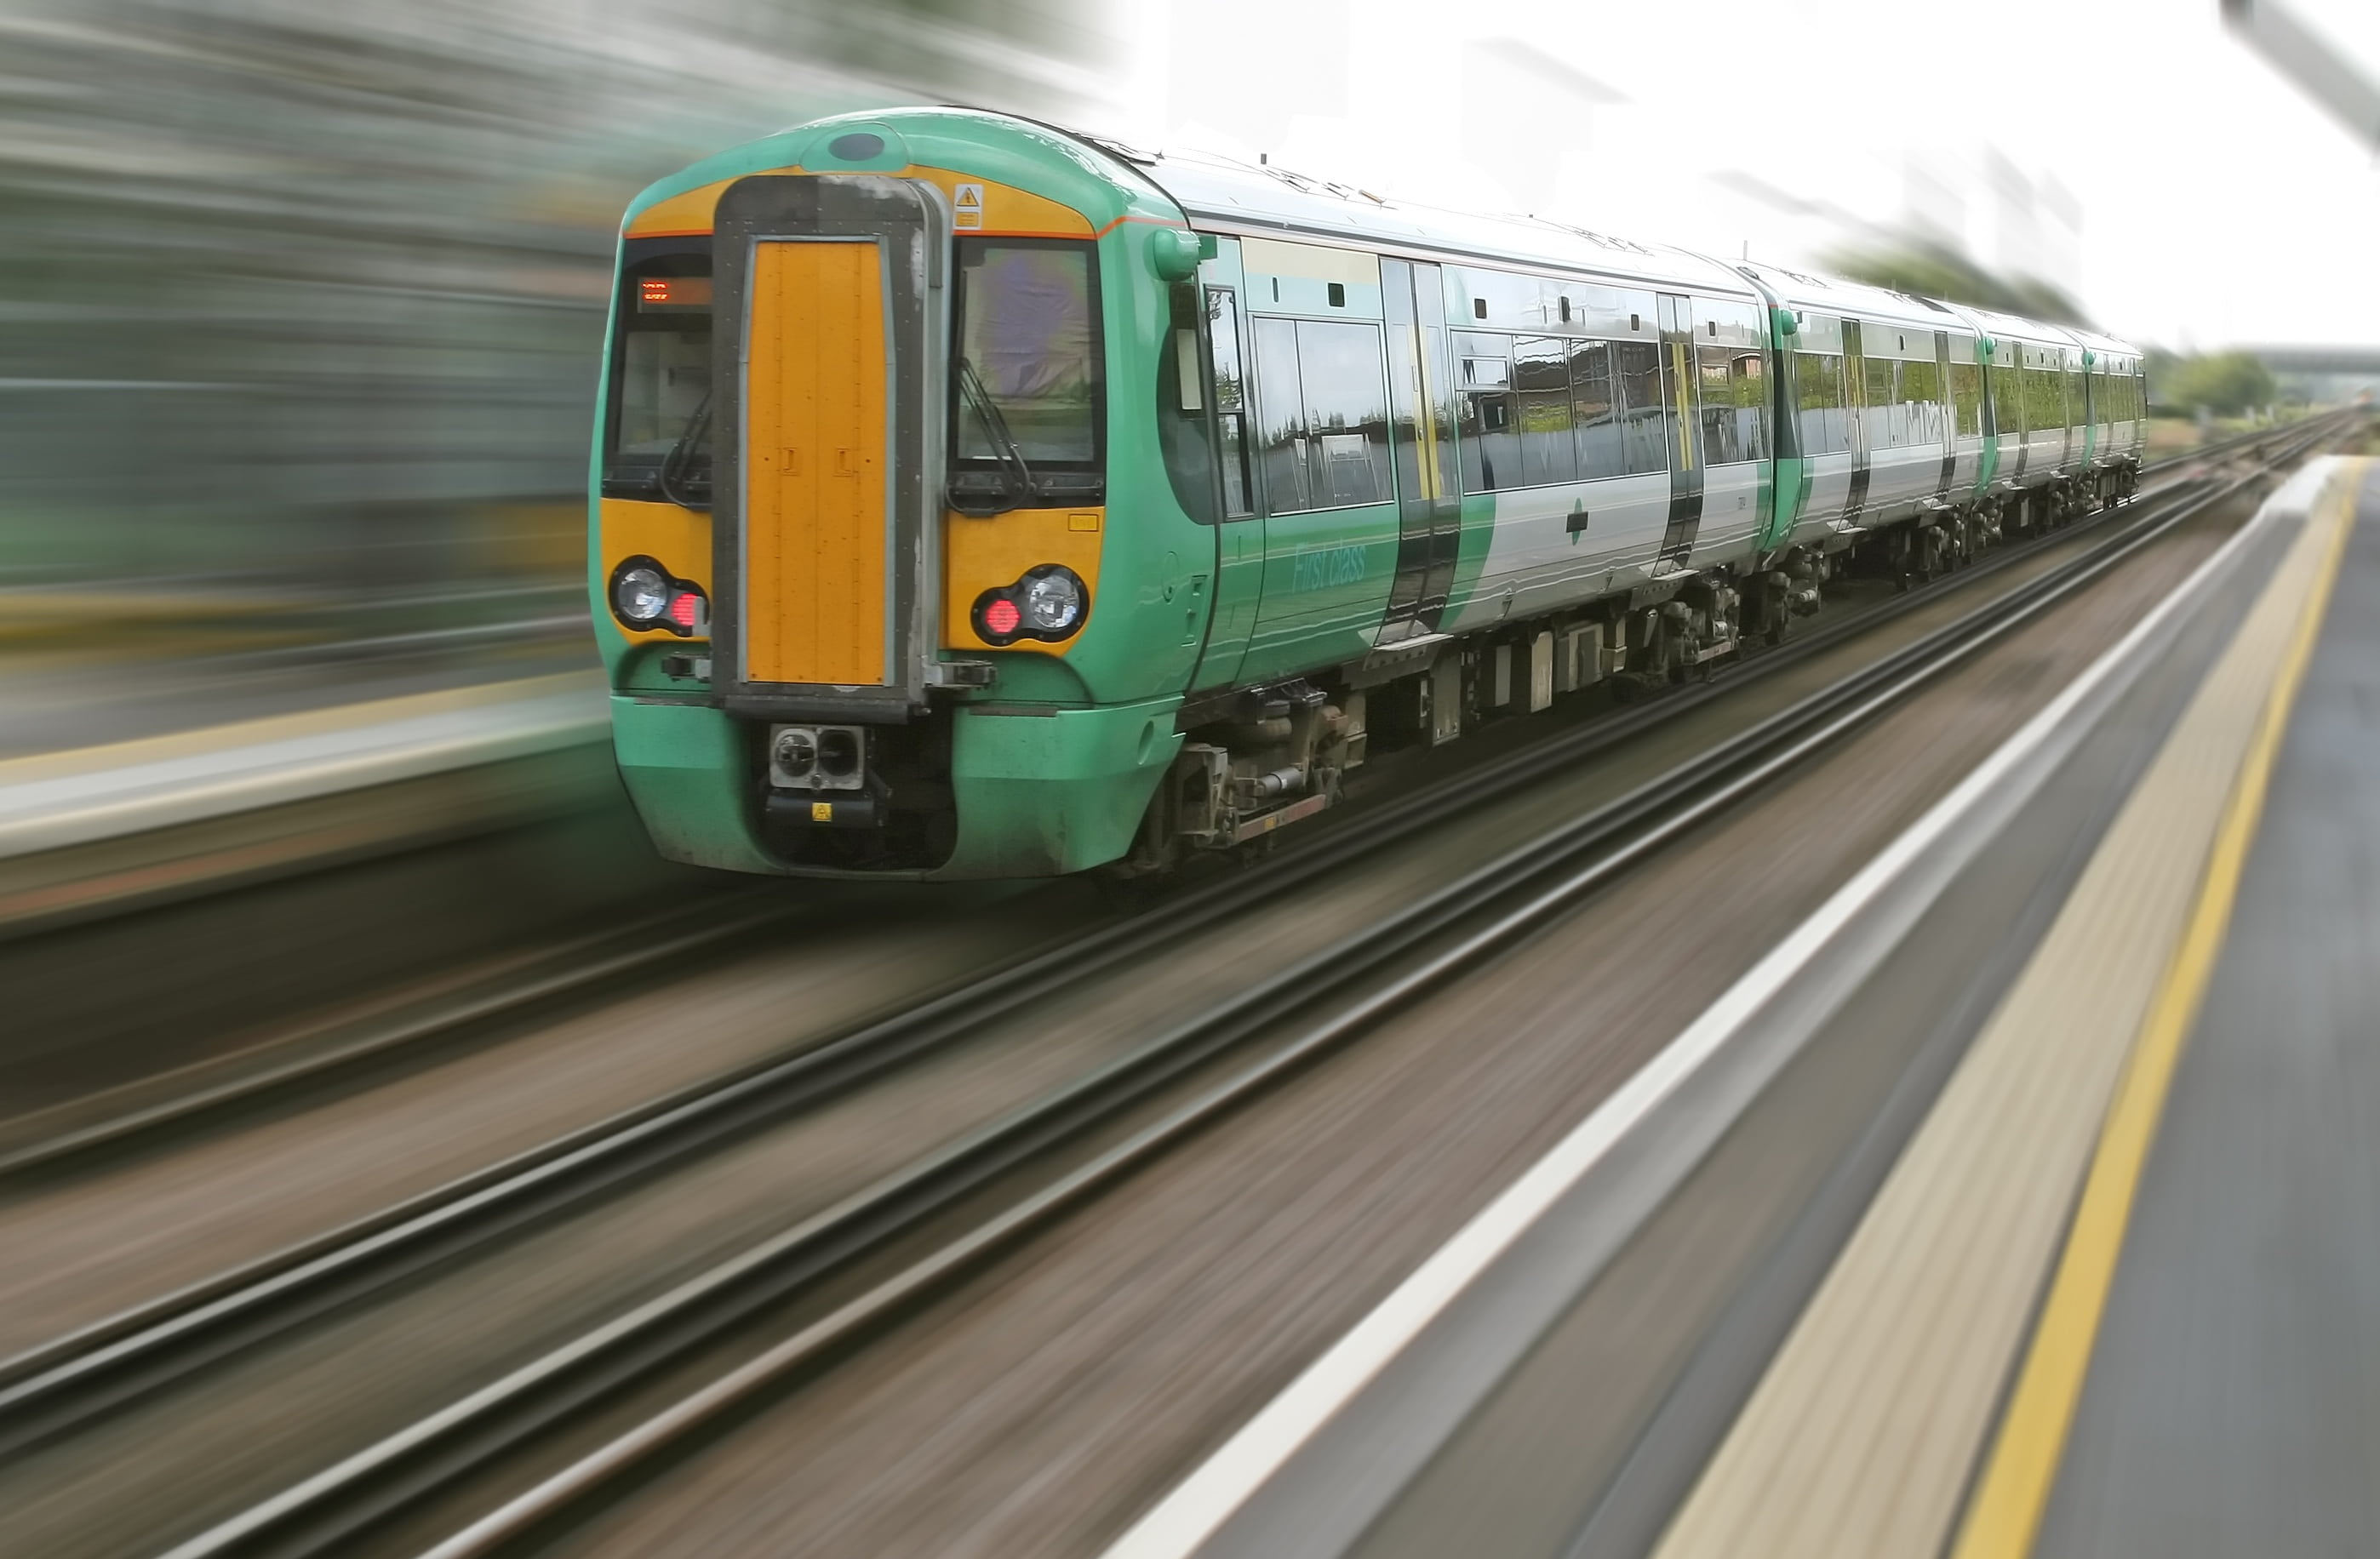 time lapse train photo, abstract, blur, britain, british, business